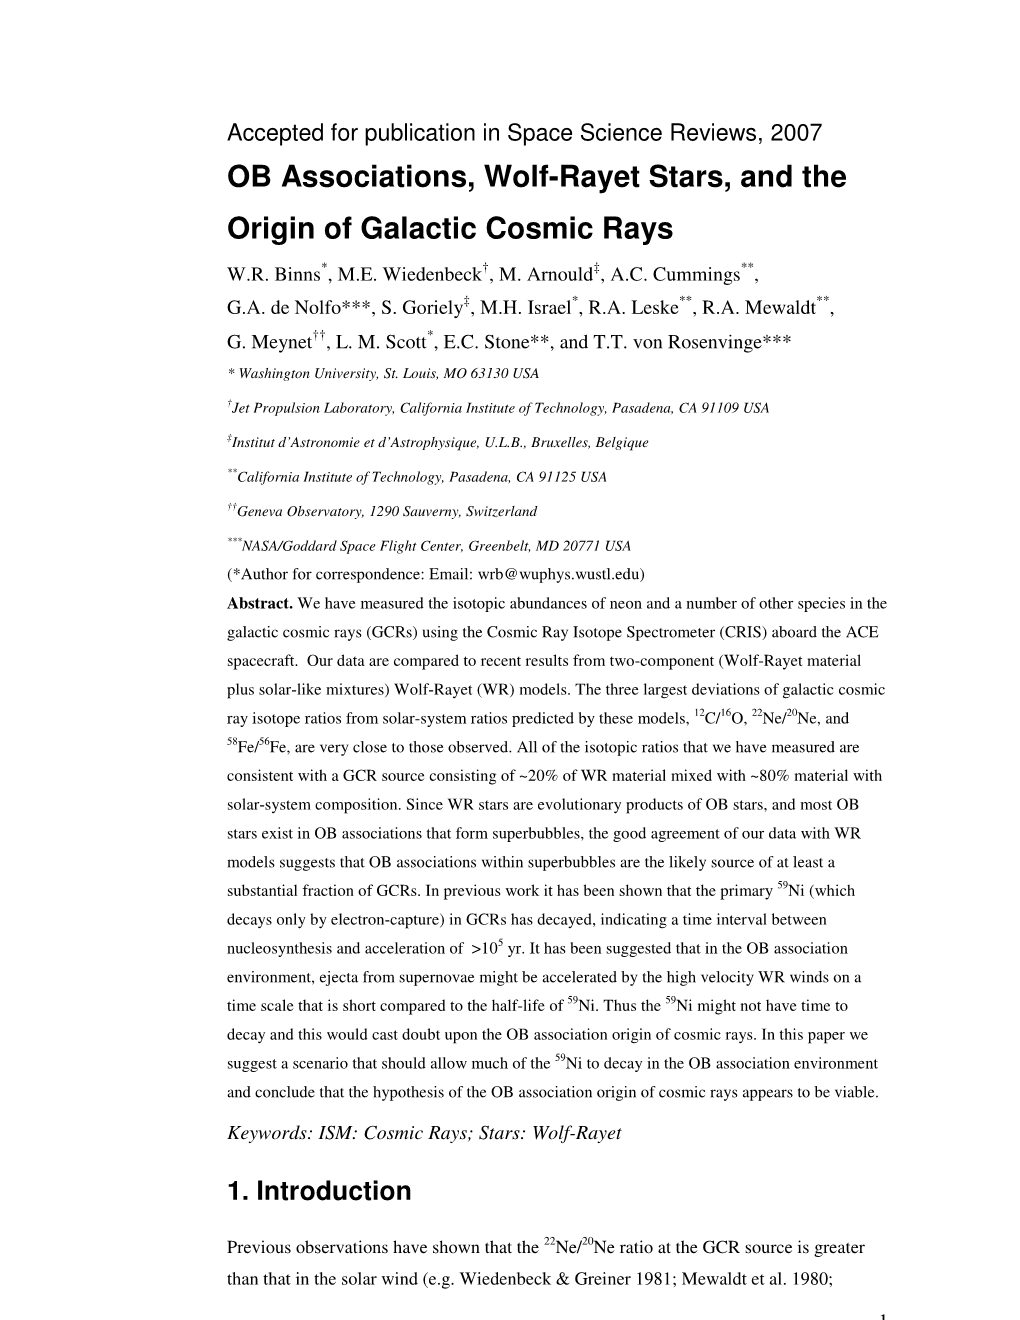 OB Associations, Wolf-Rayet Stars, and the Origin of Galactic Cosmic Rays W.R